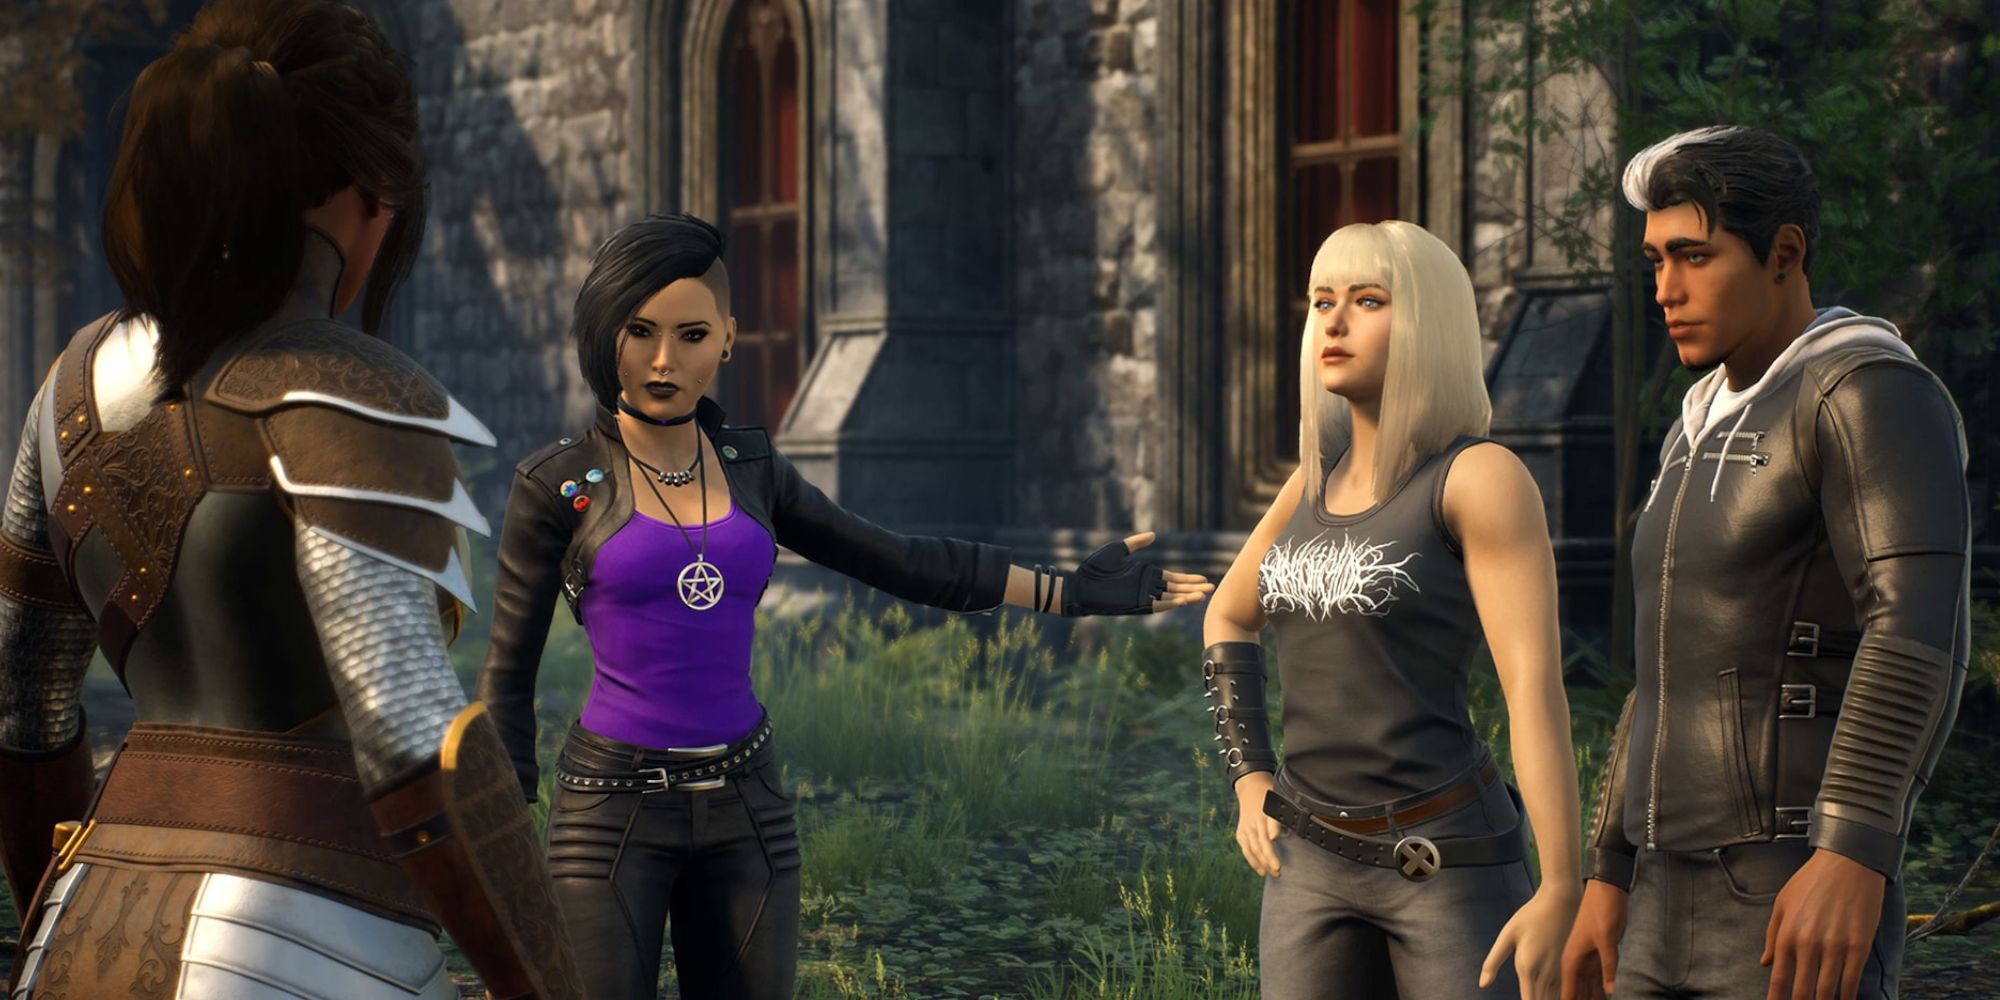 Four members of Marvel's Midnight Suns' eponymous team, having a discussion outside of a stone building.